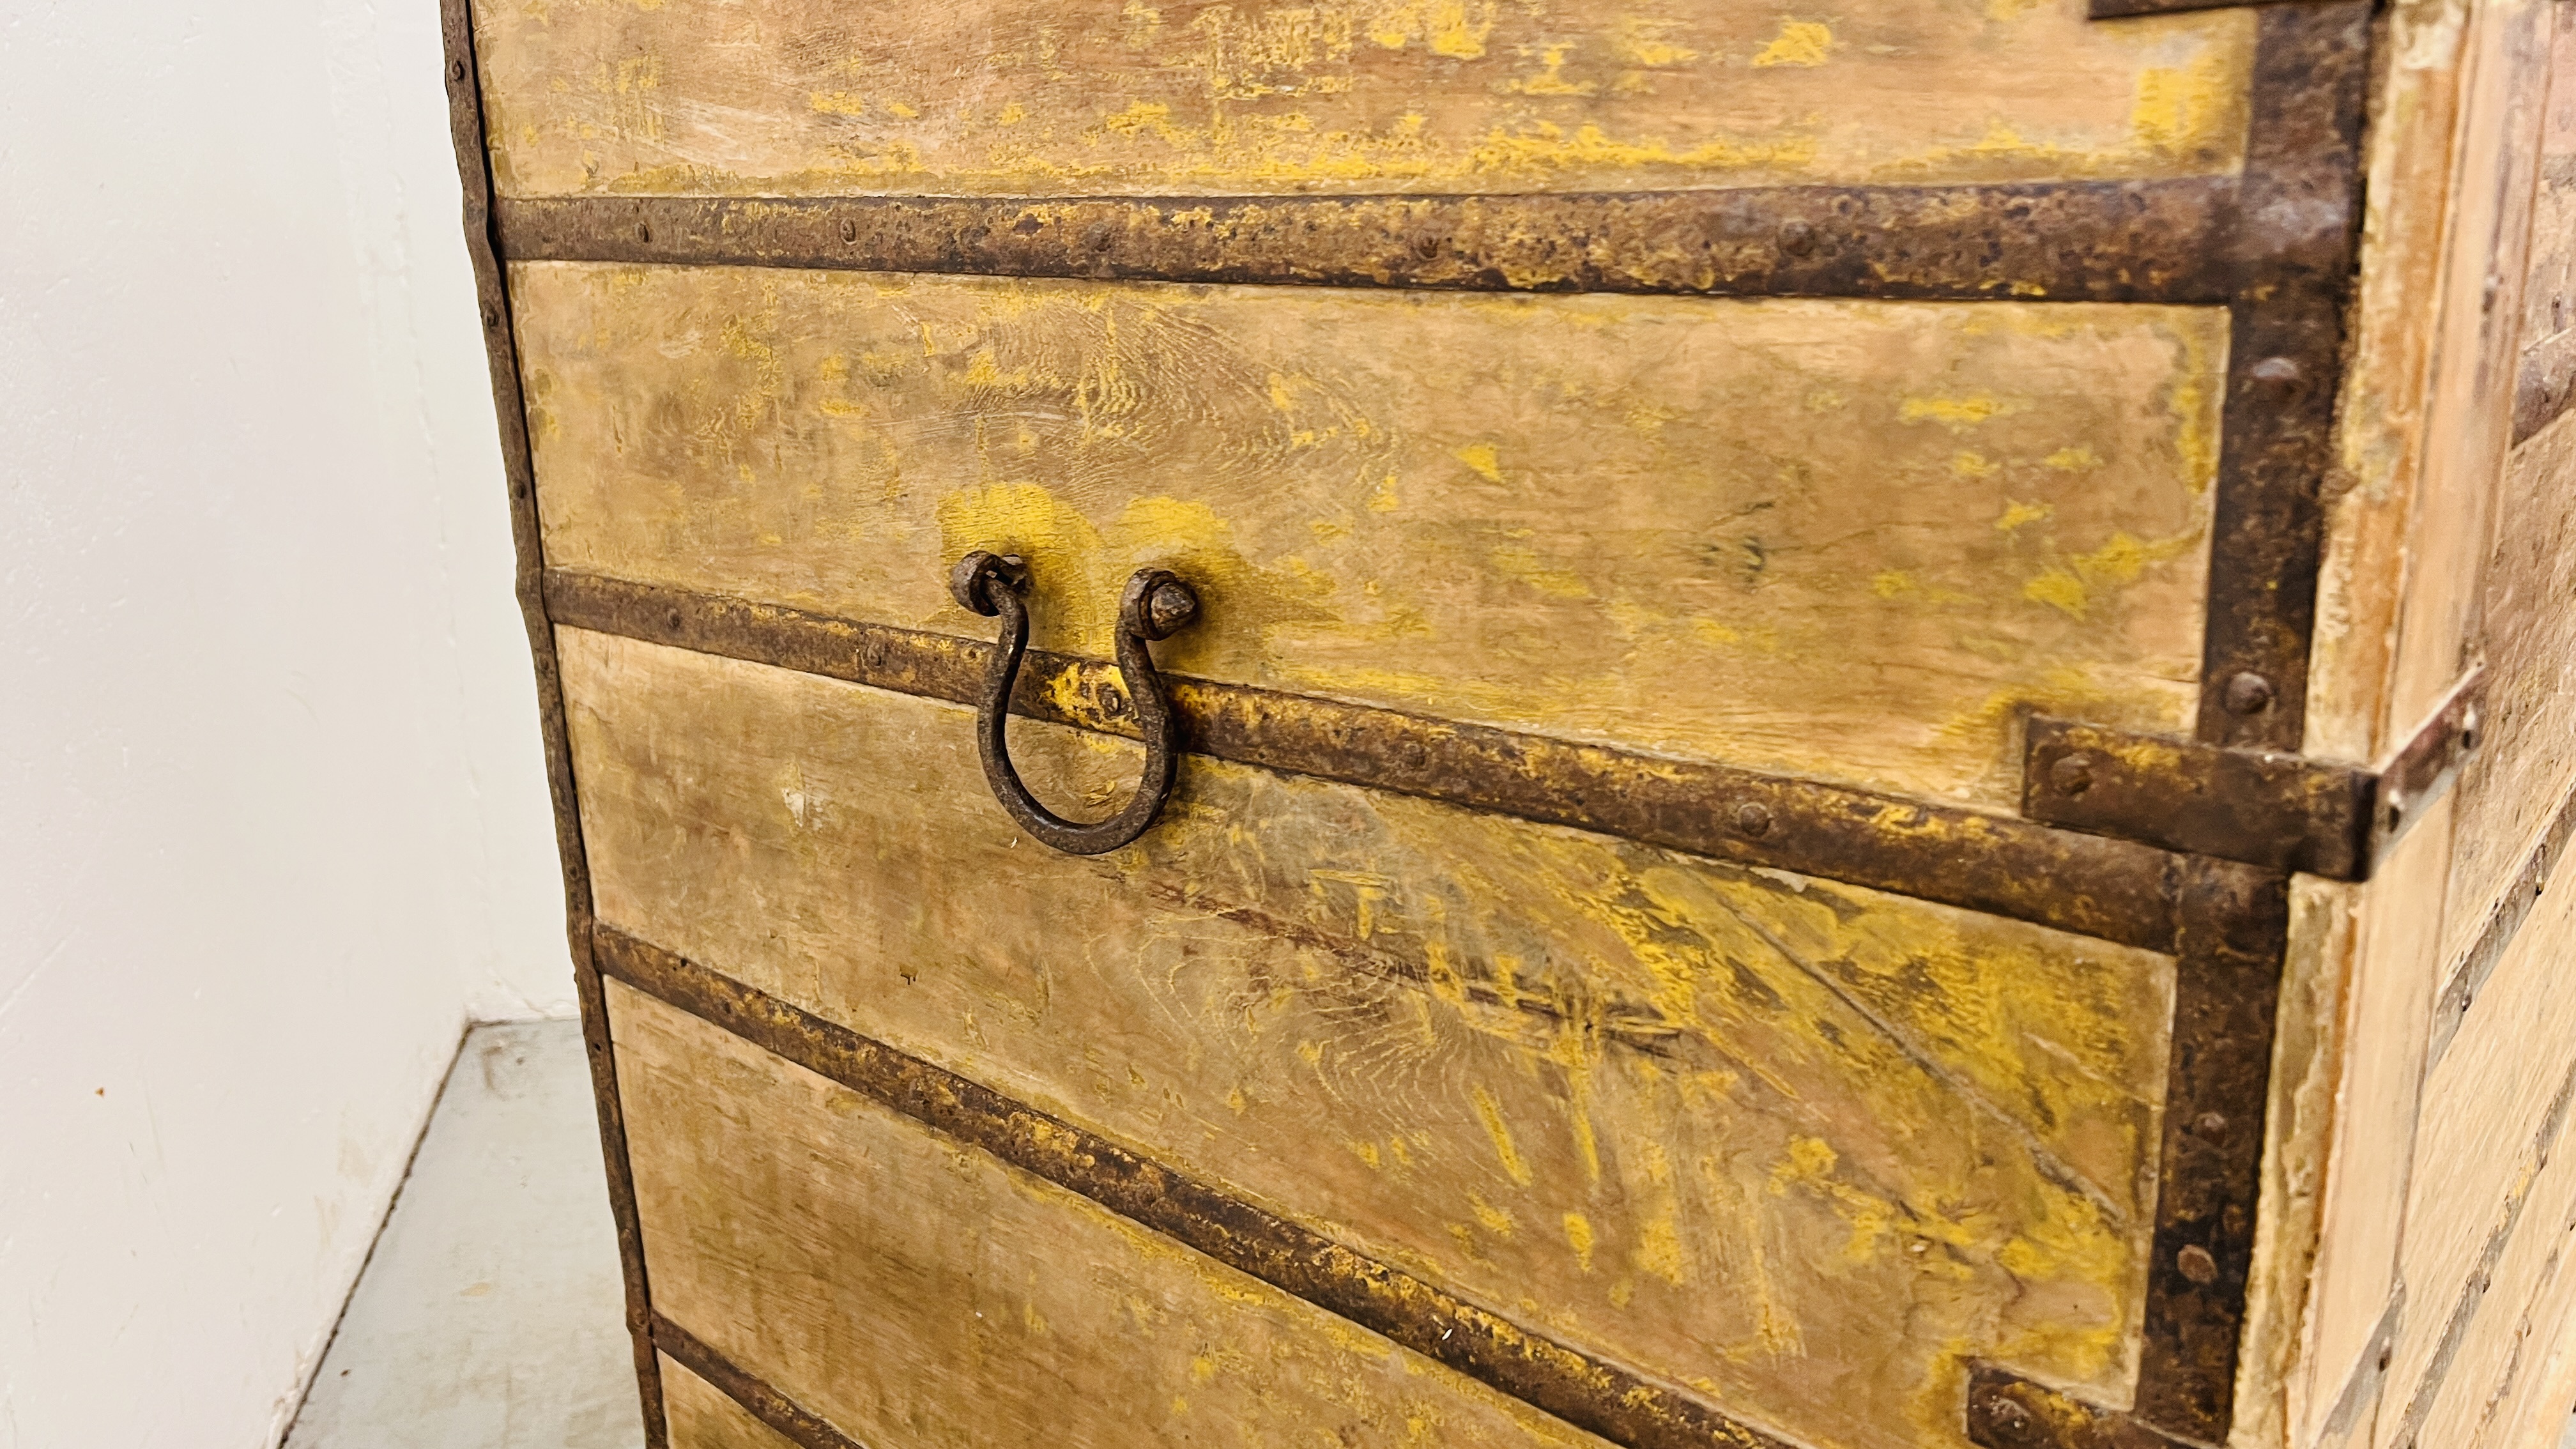 AN EXTREMELY LARGE RAJASTHANI 19th CENTURY DOWRY CHEST - 158CM W X 81CM D X 123CM H. - Image 10 of 30